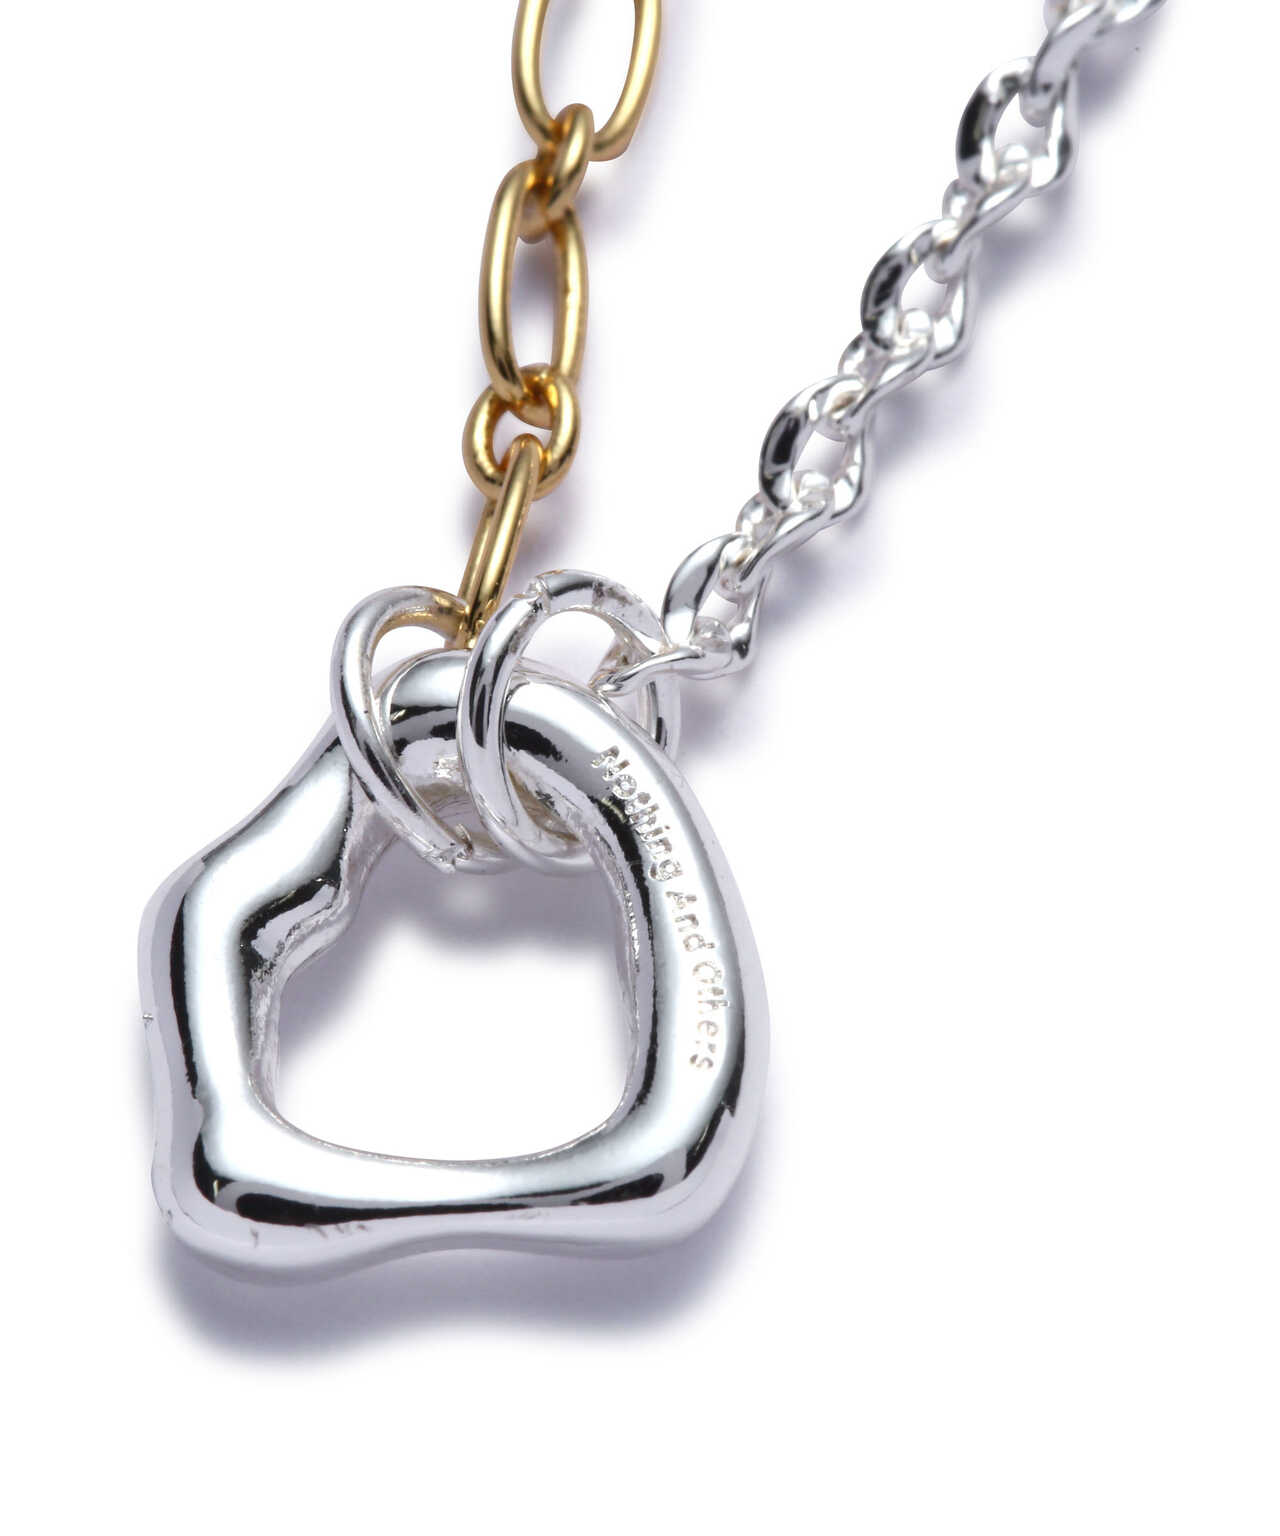 Nothing And Others/DoubleChain Necklace | ROYAL FLASH ( ロイヤル